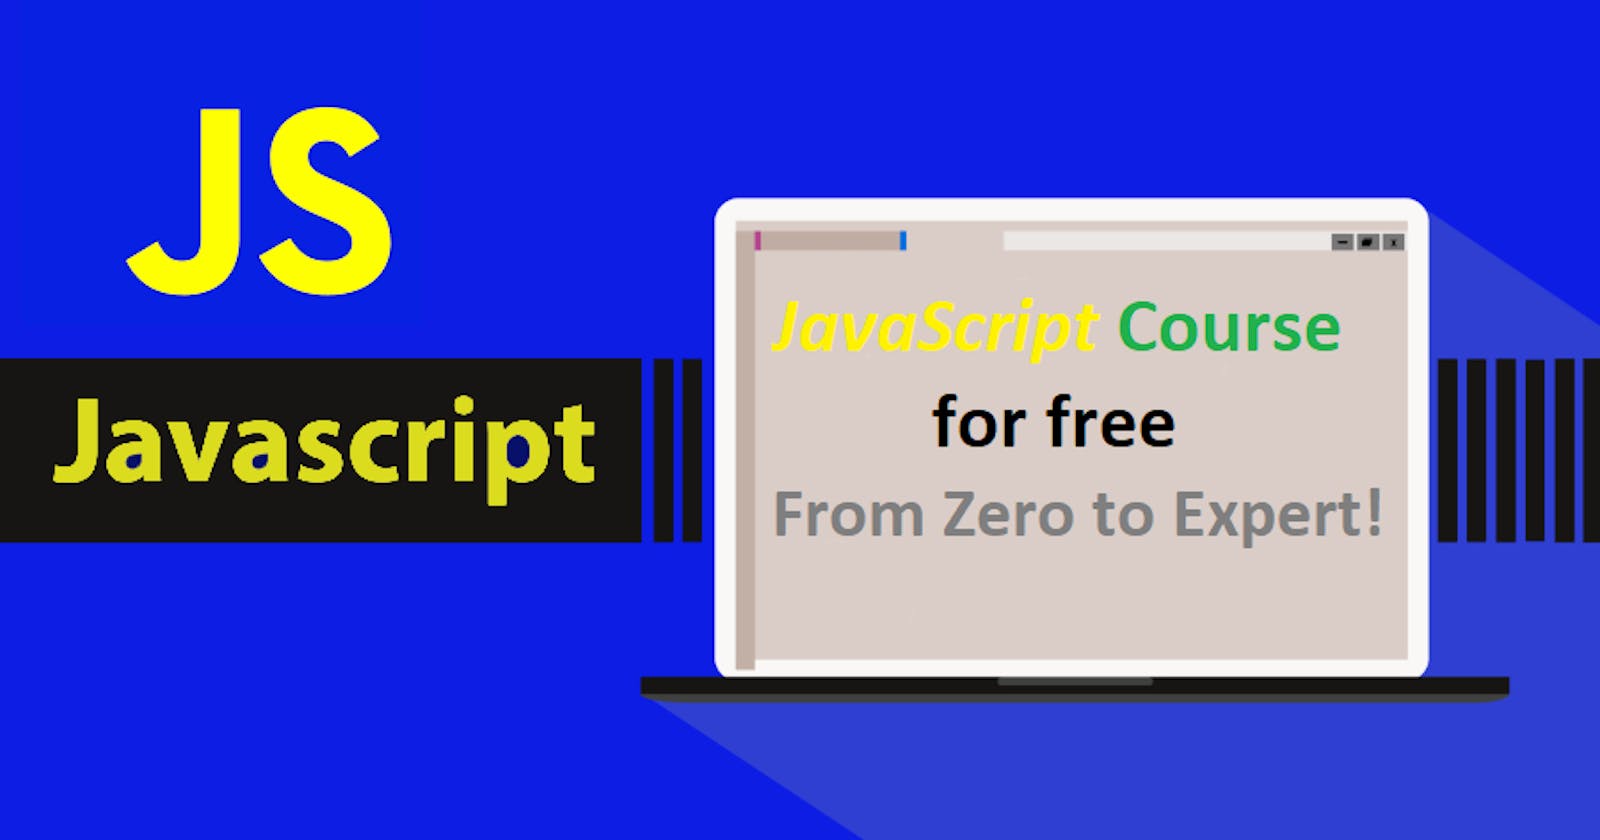 JavaScript Course for free 2022 From Zero to Expert